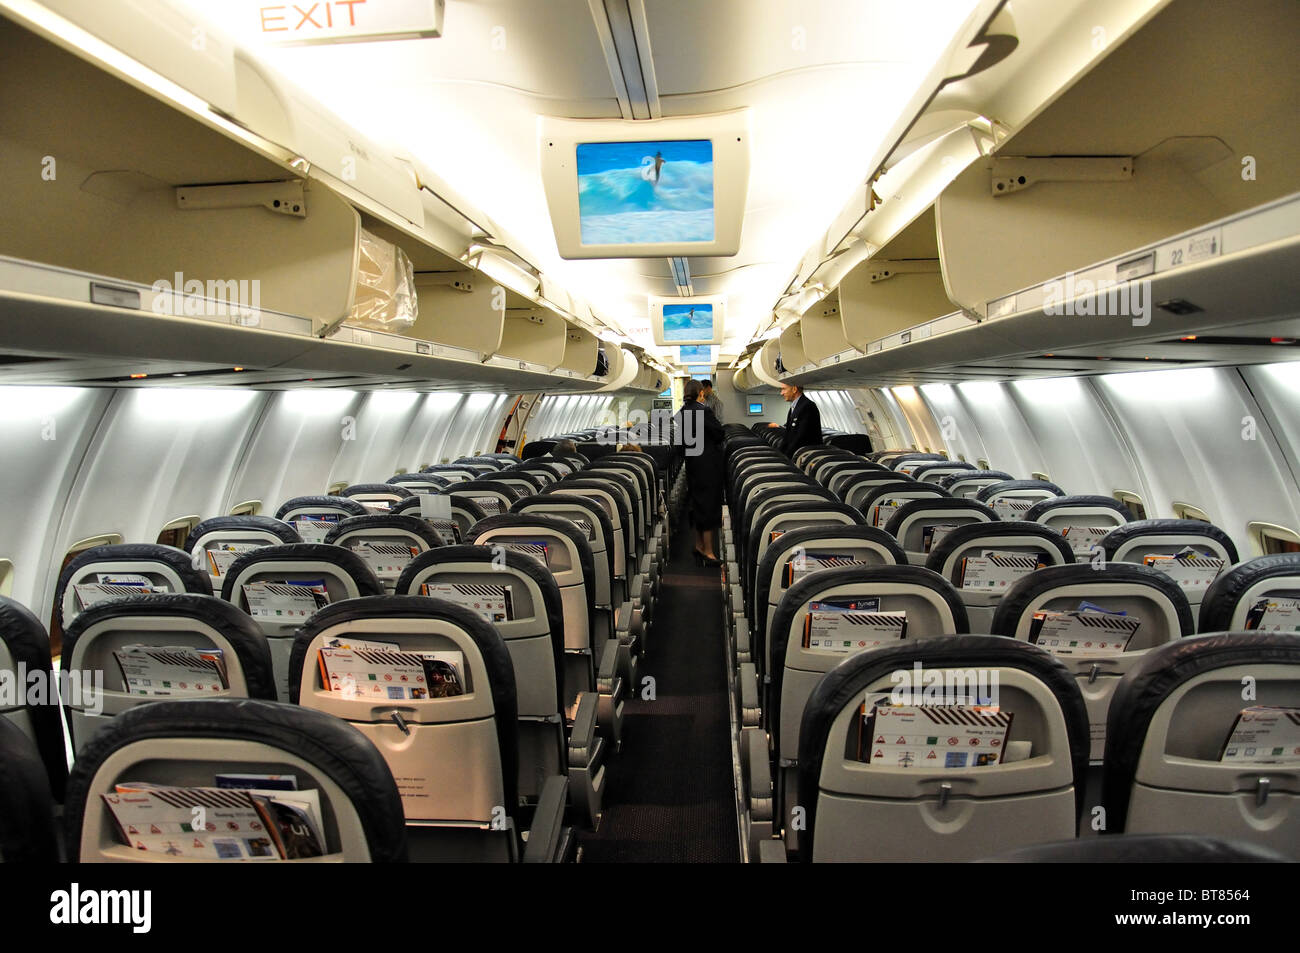 Thomson Boeing 757-200 aircraft interior, North Terminal, Gatwick Airport, Crawley, West Sussex, England, United Kingdom Stock Photo